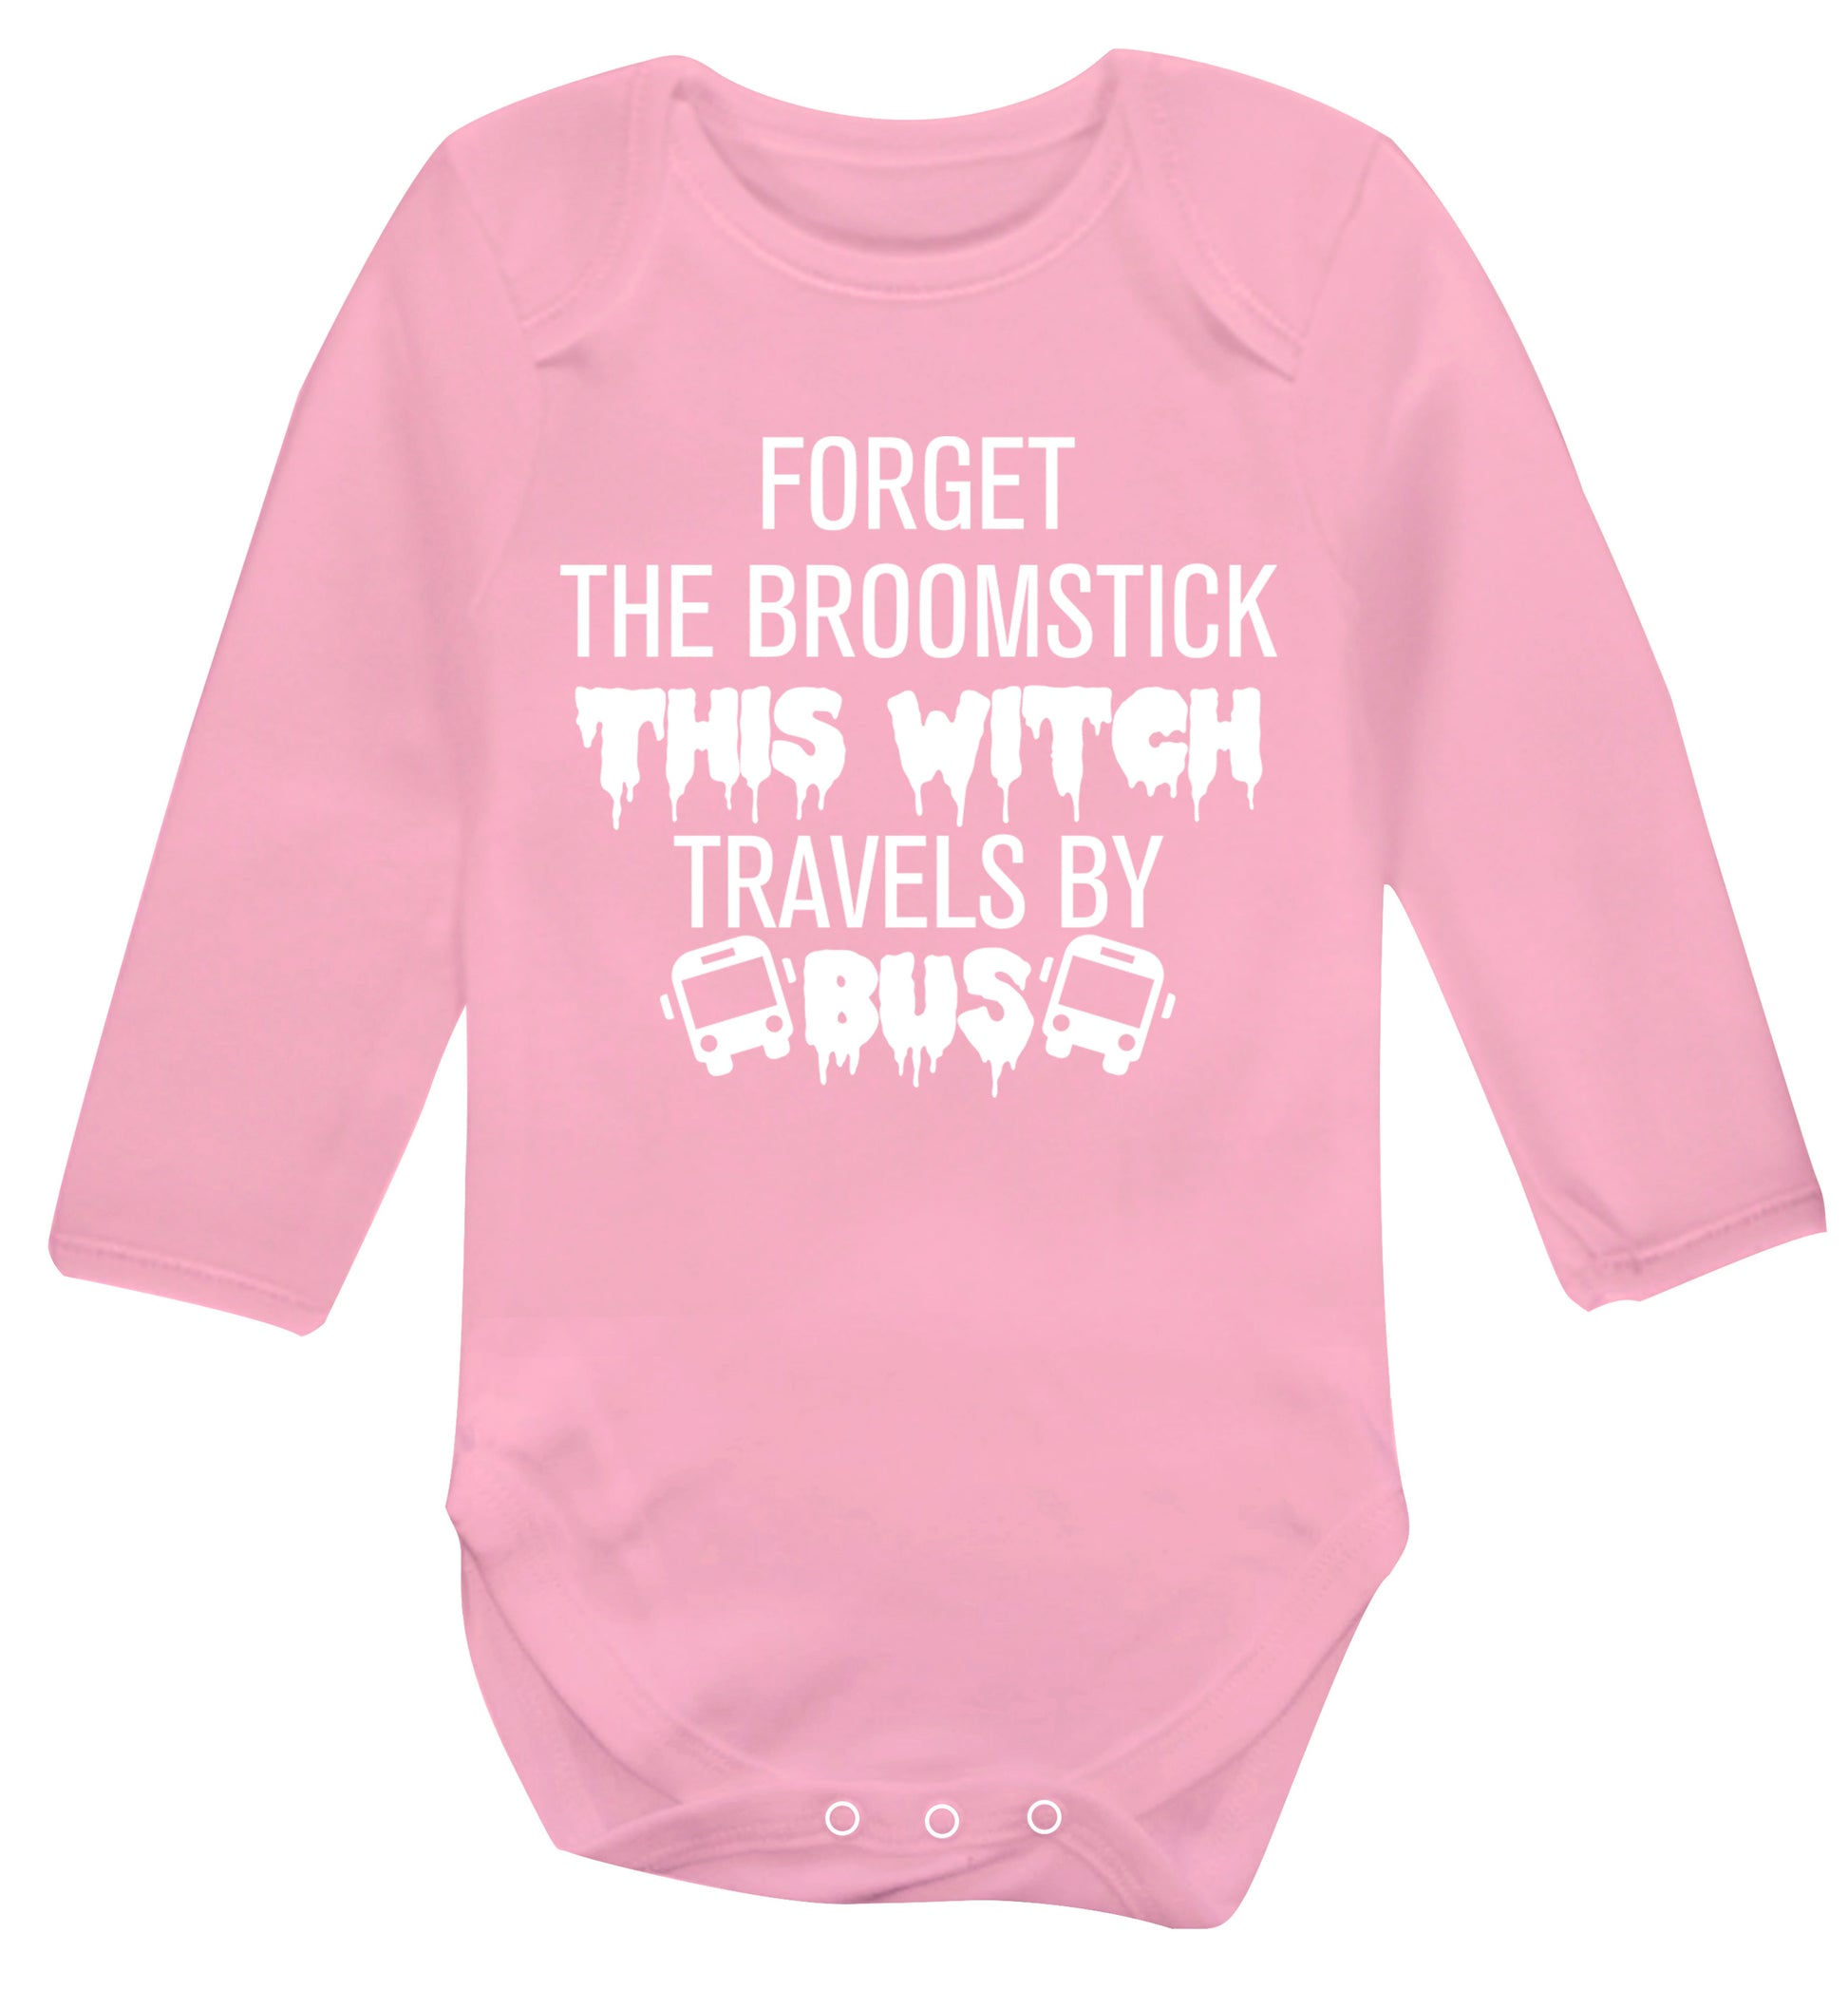 Forget the broomstick this witch travels by bus Baby Vest long sleeved pale pink 6-12 months